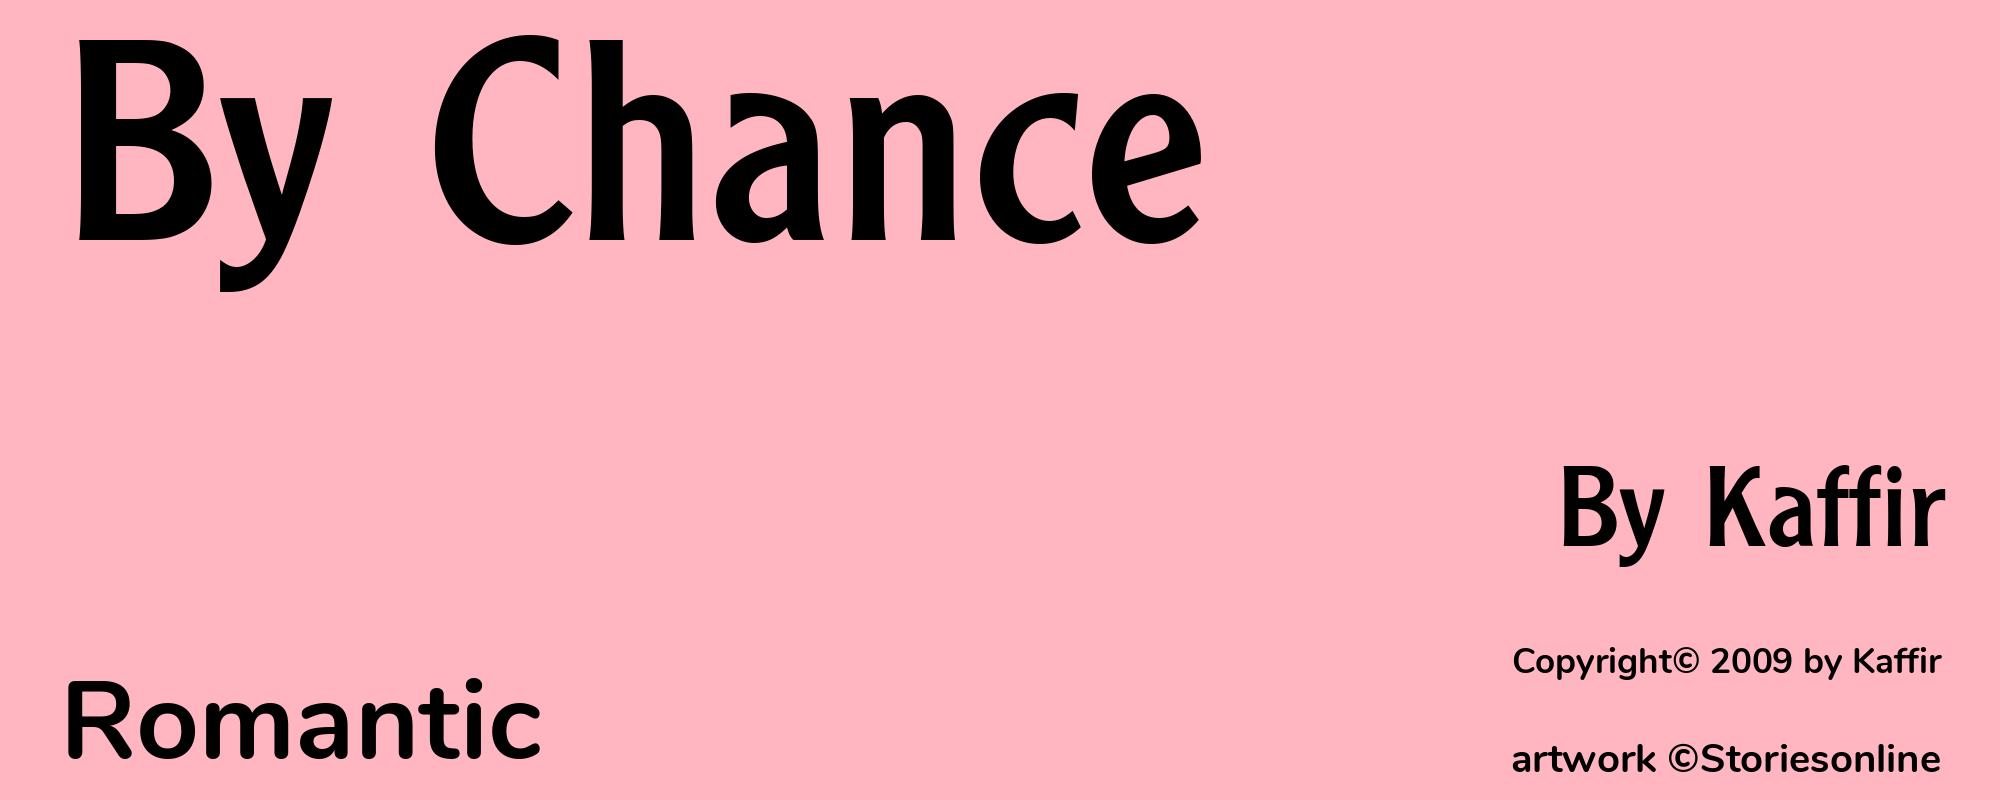 By Chance - Cover